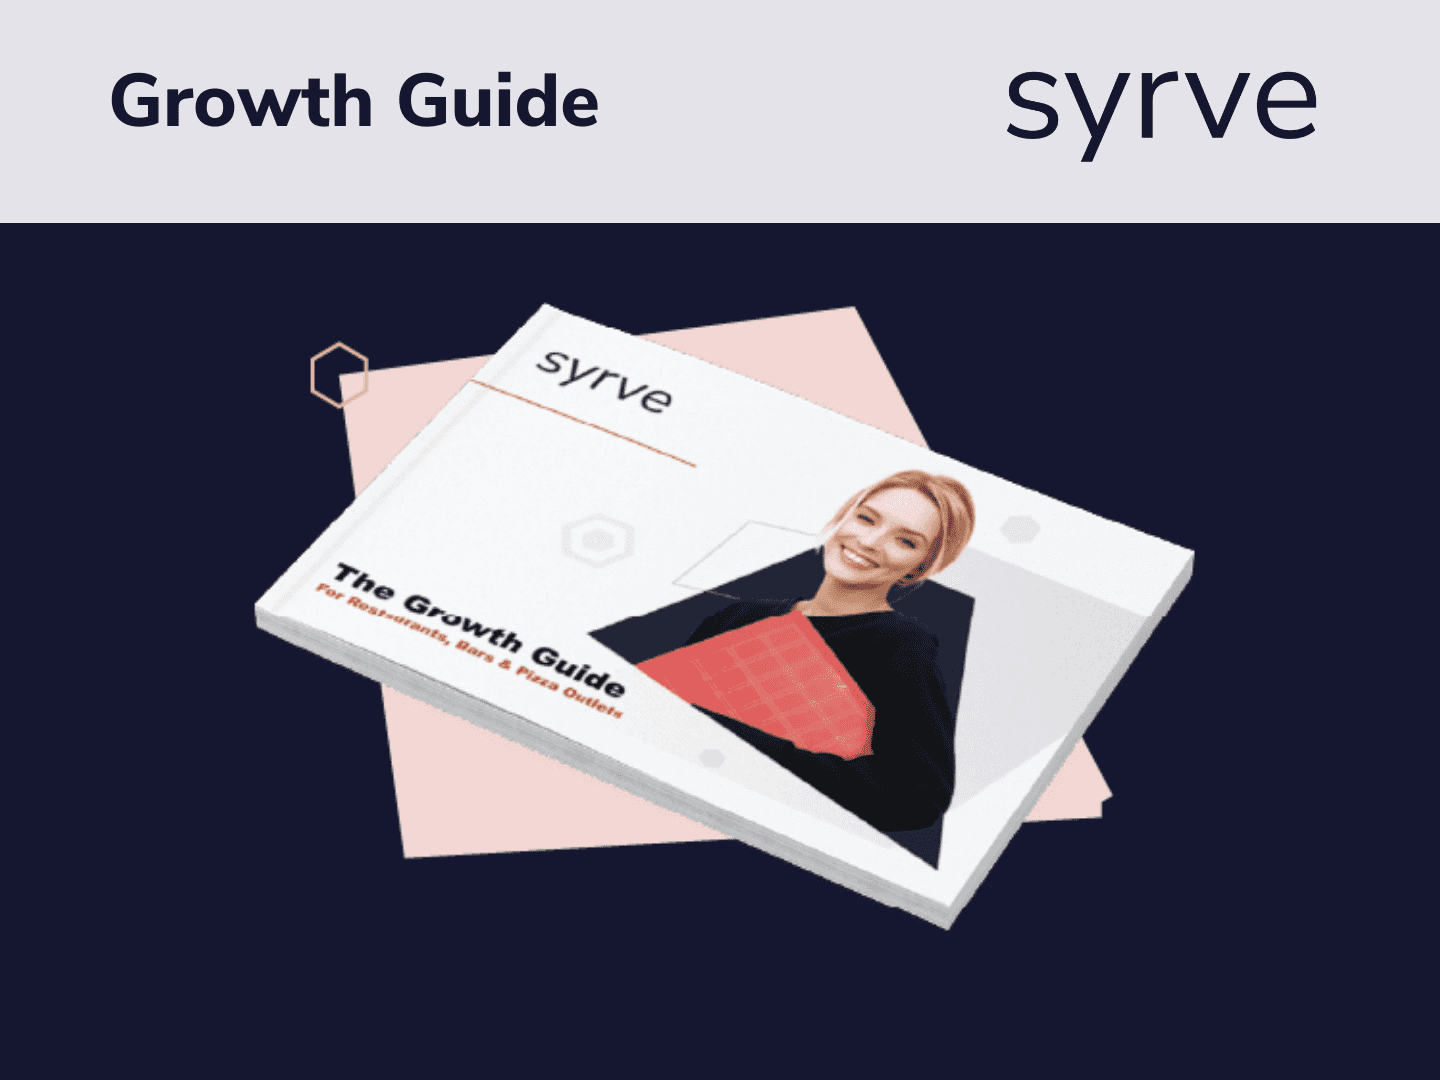 Growth Guide